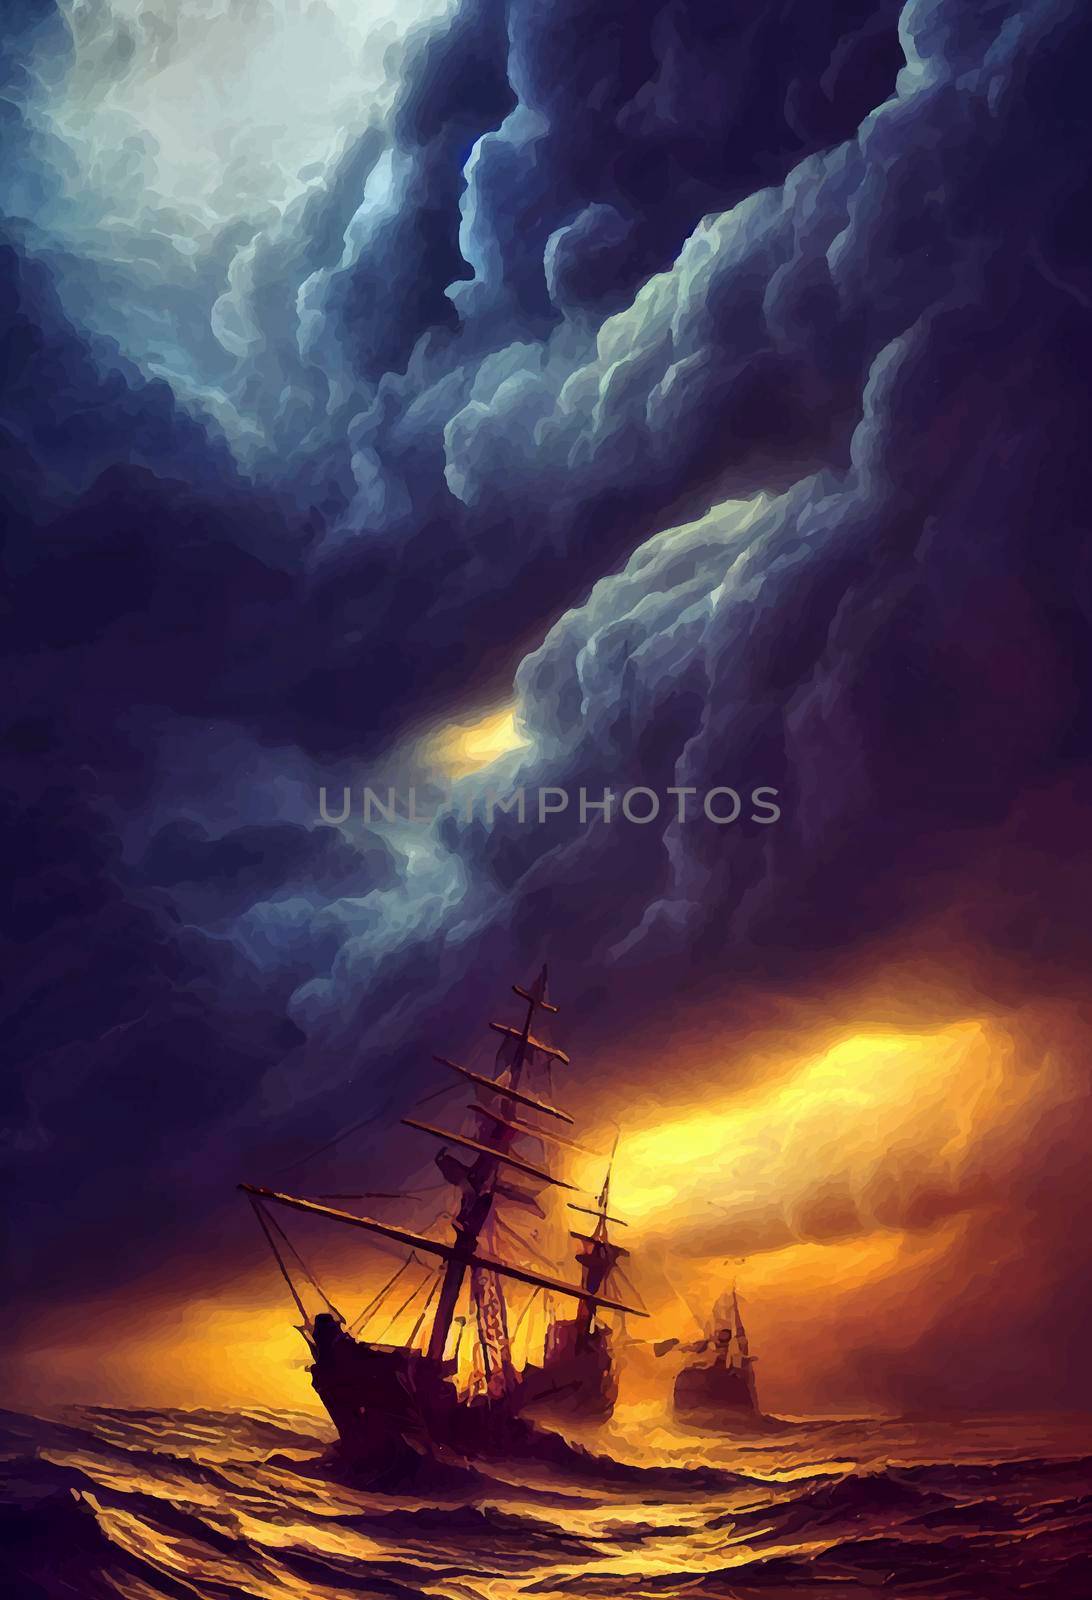 ship in the ocean in the middle of a storm illustration. by JpRamos